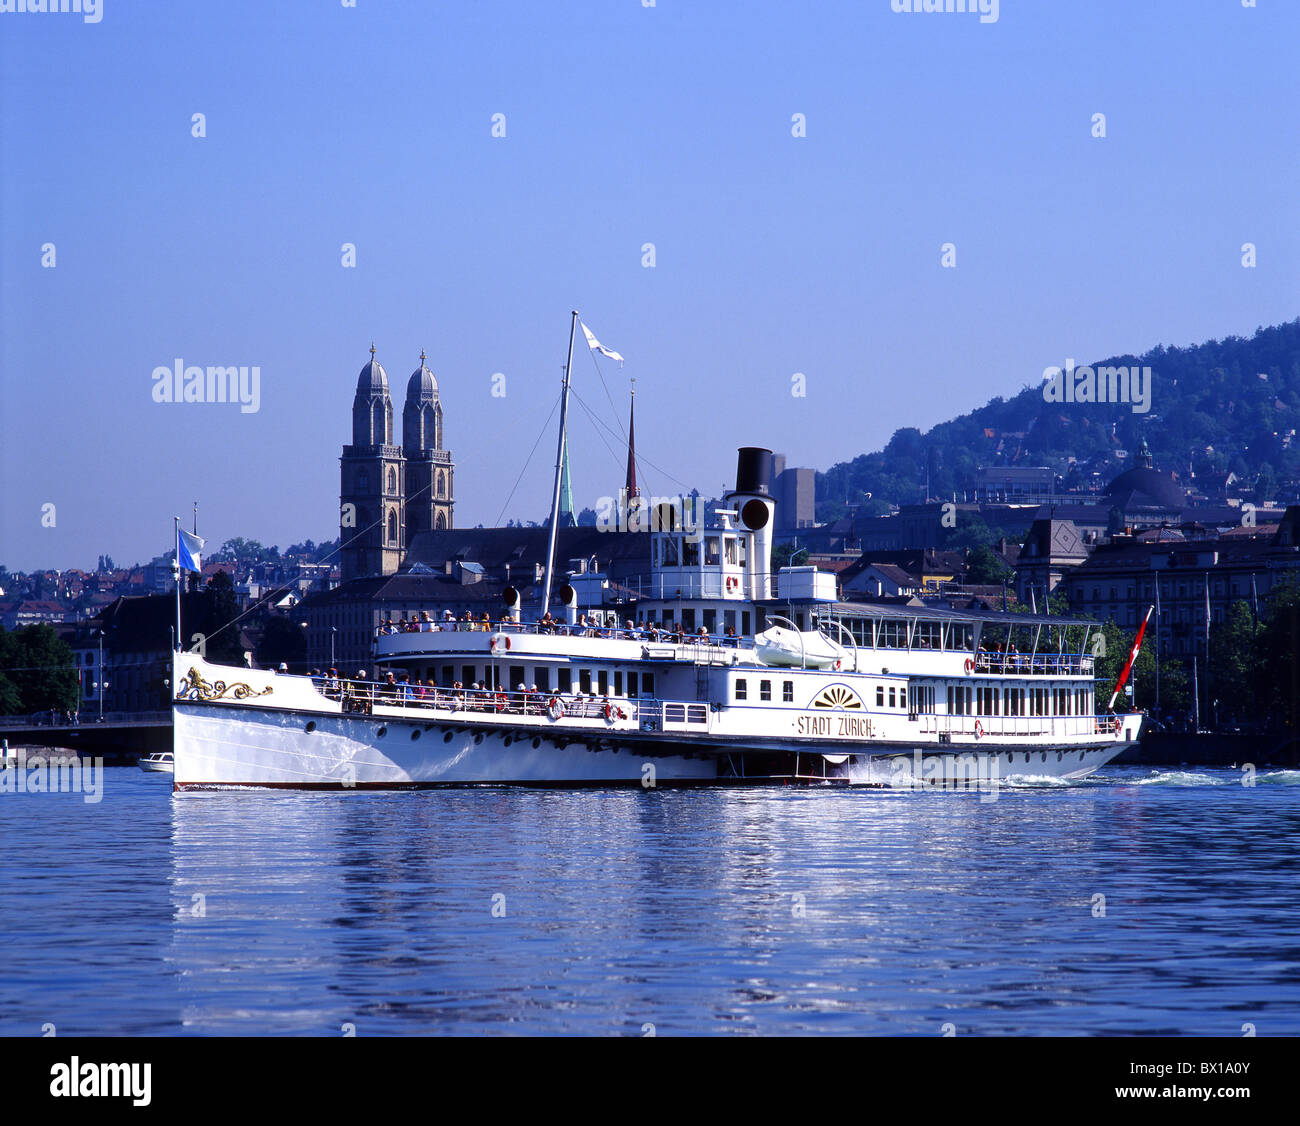 church city excursion Grossmunster minster church lake lakes ship Steamboat summer Switzerland Europe t Stock Photo